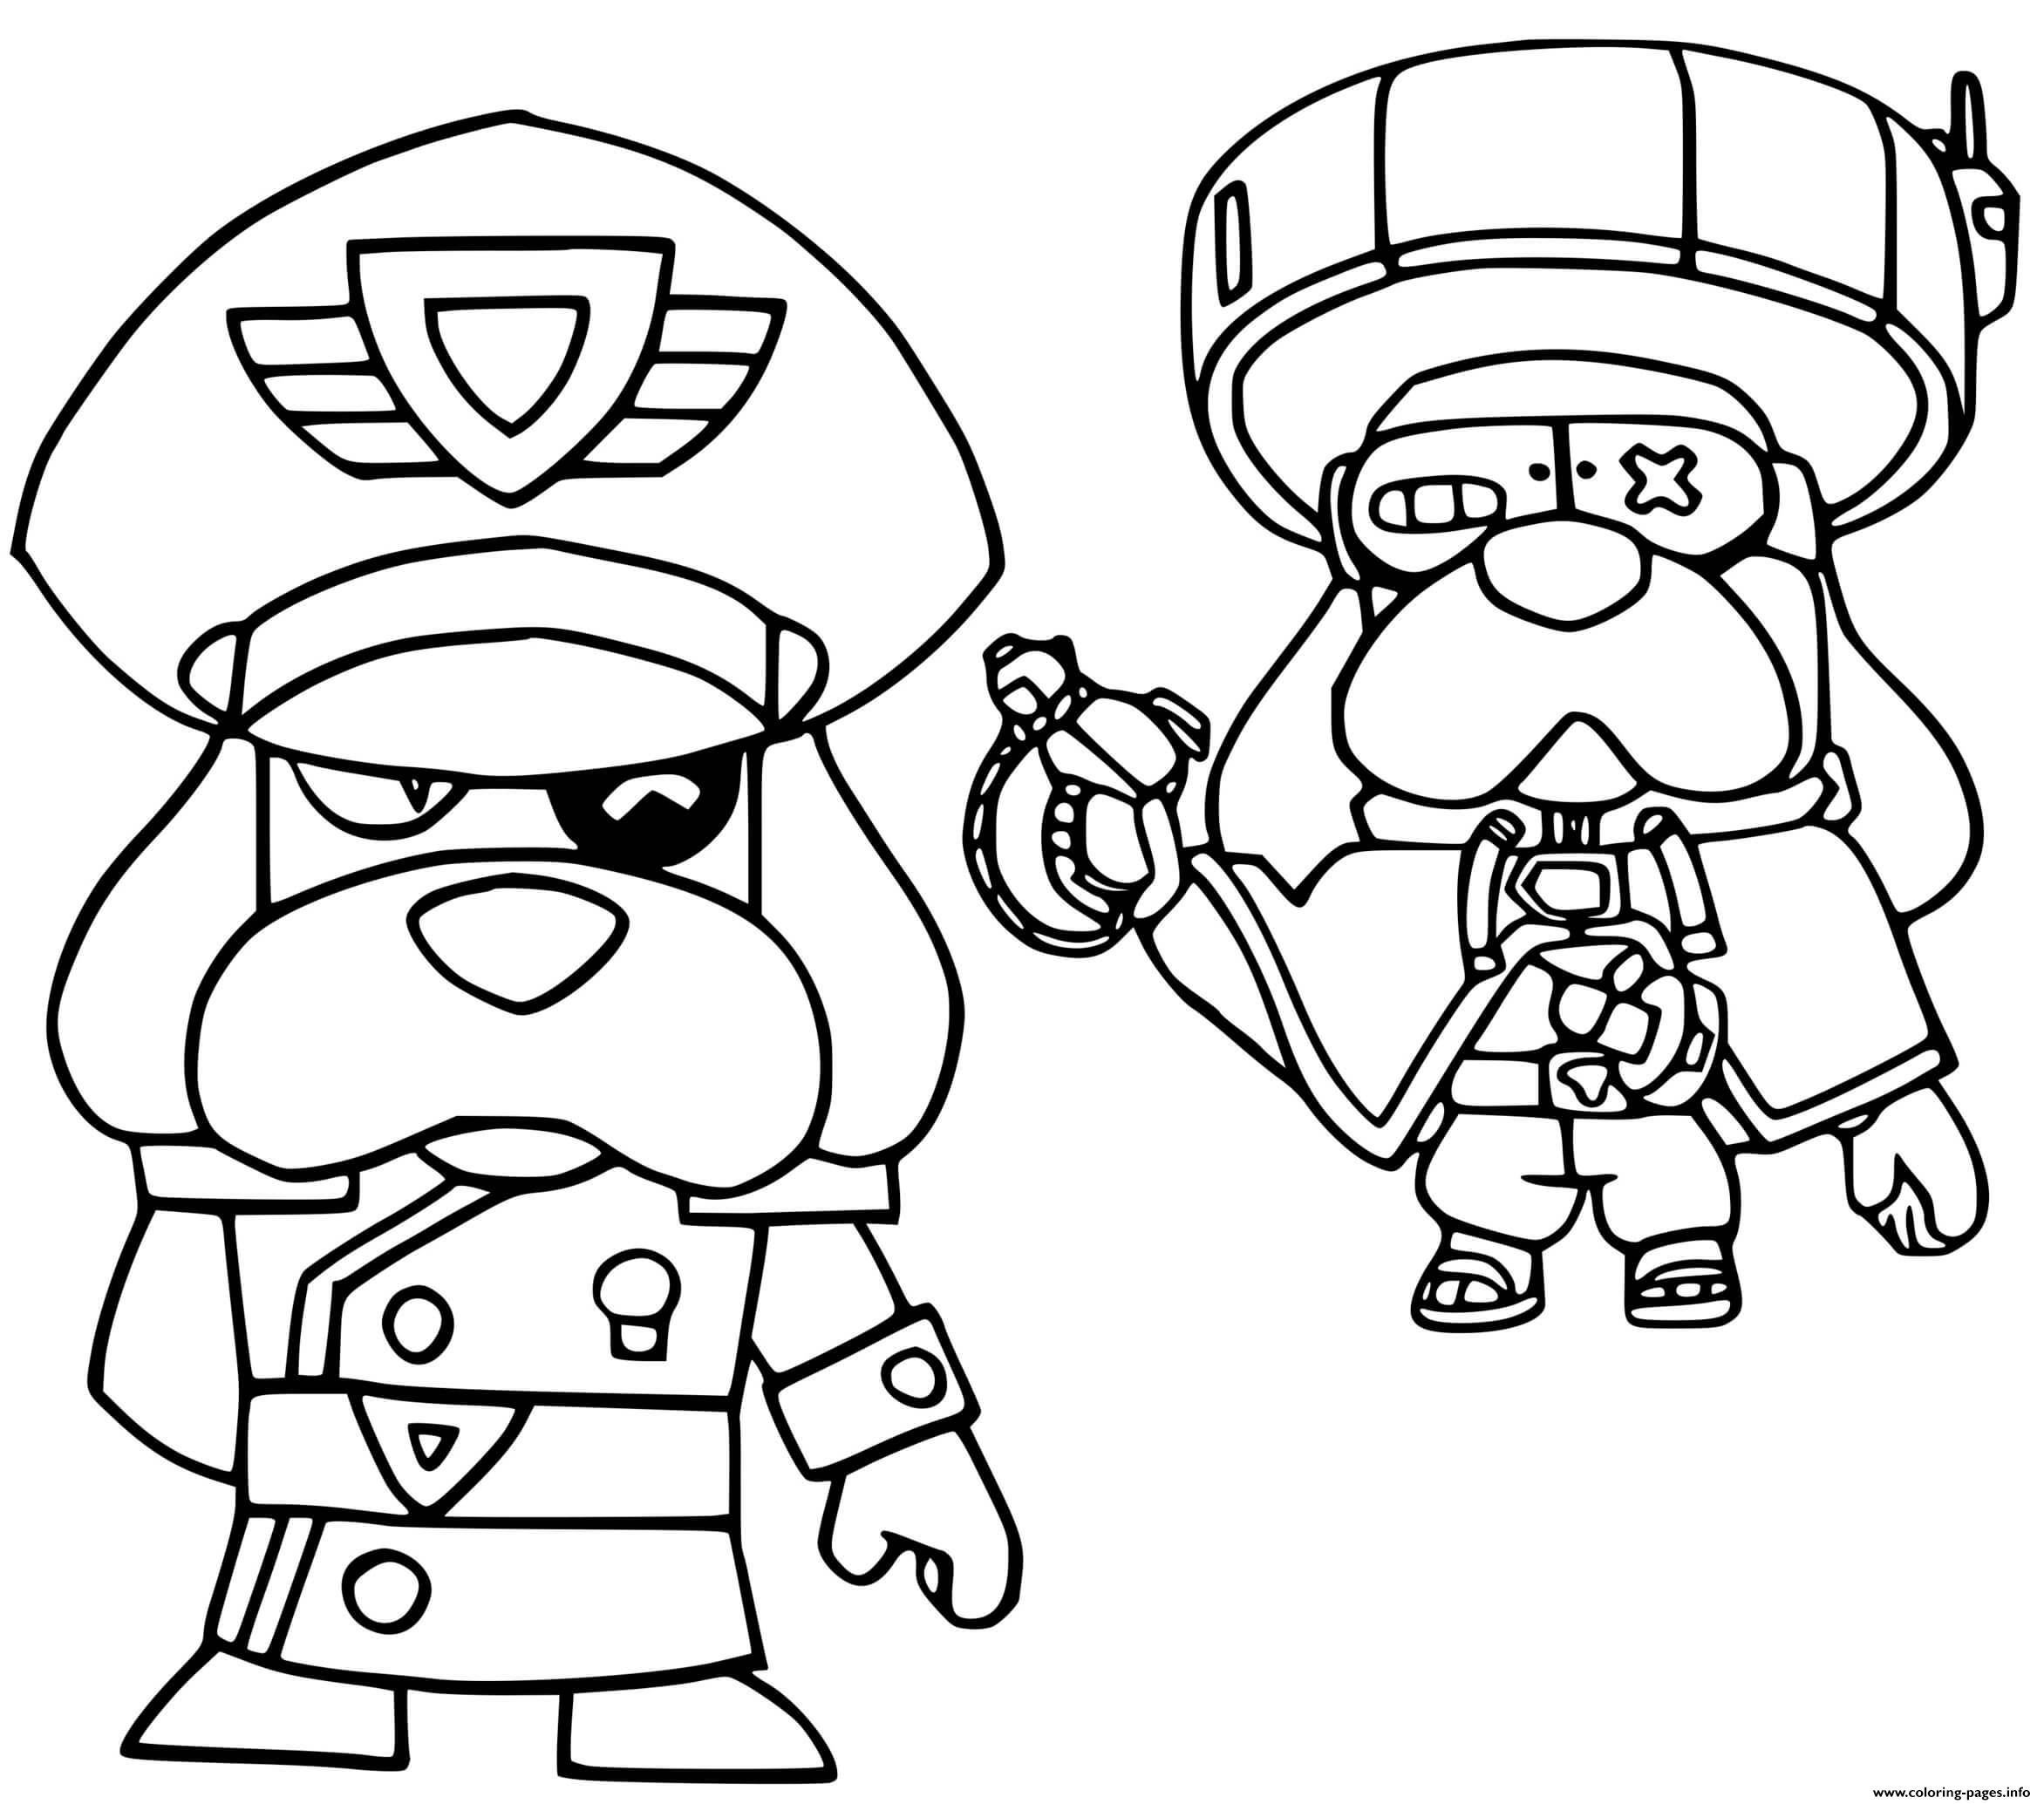 Brawl Stars Force Starr Colonel Medor Et Medor Ronin Coloring Pages Printable - coloriage brawl stars mortis truand